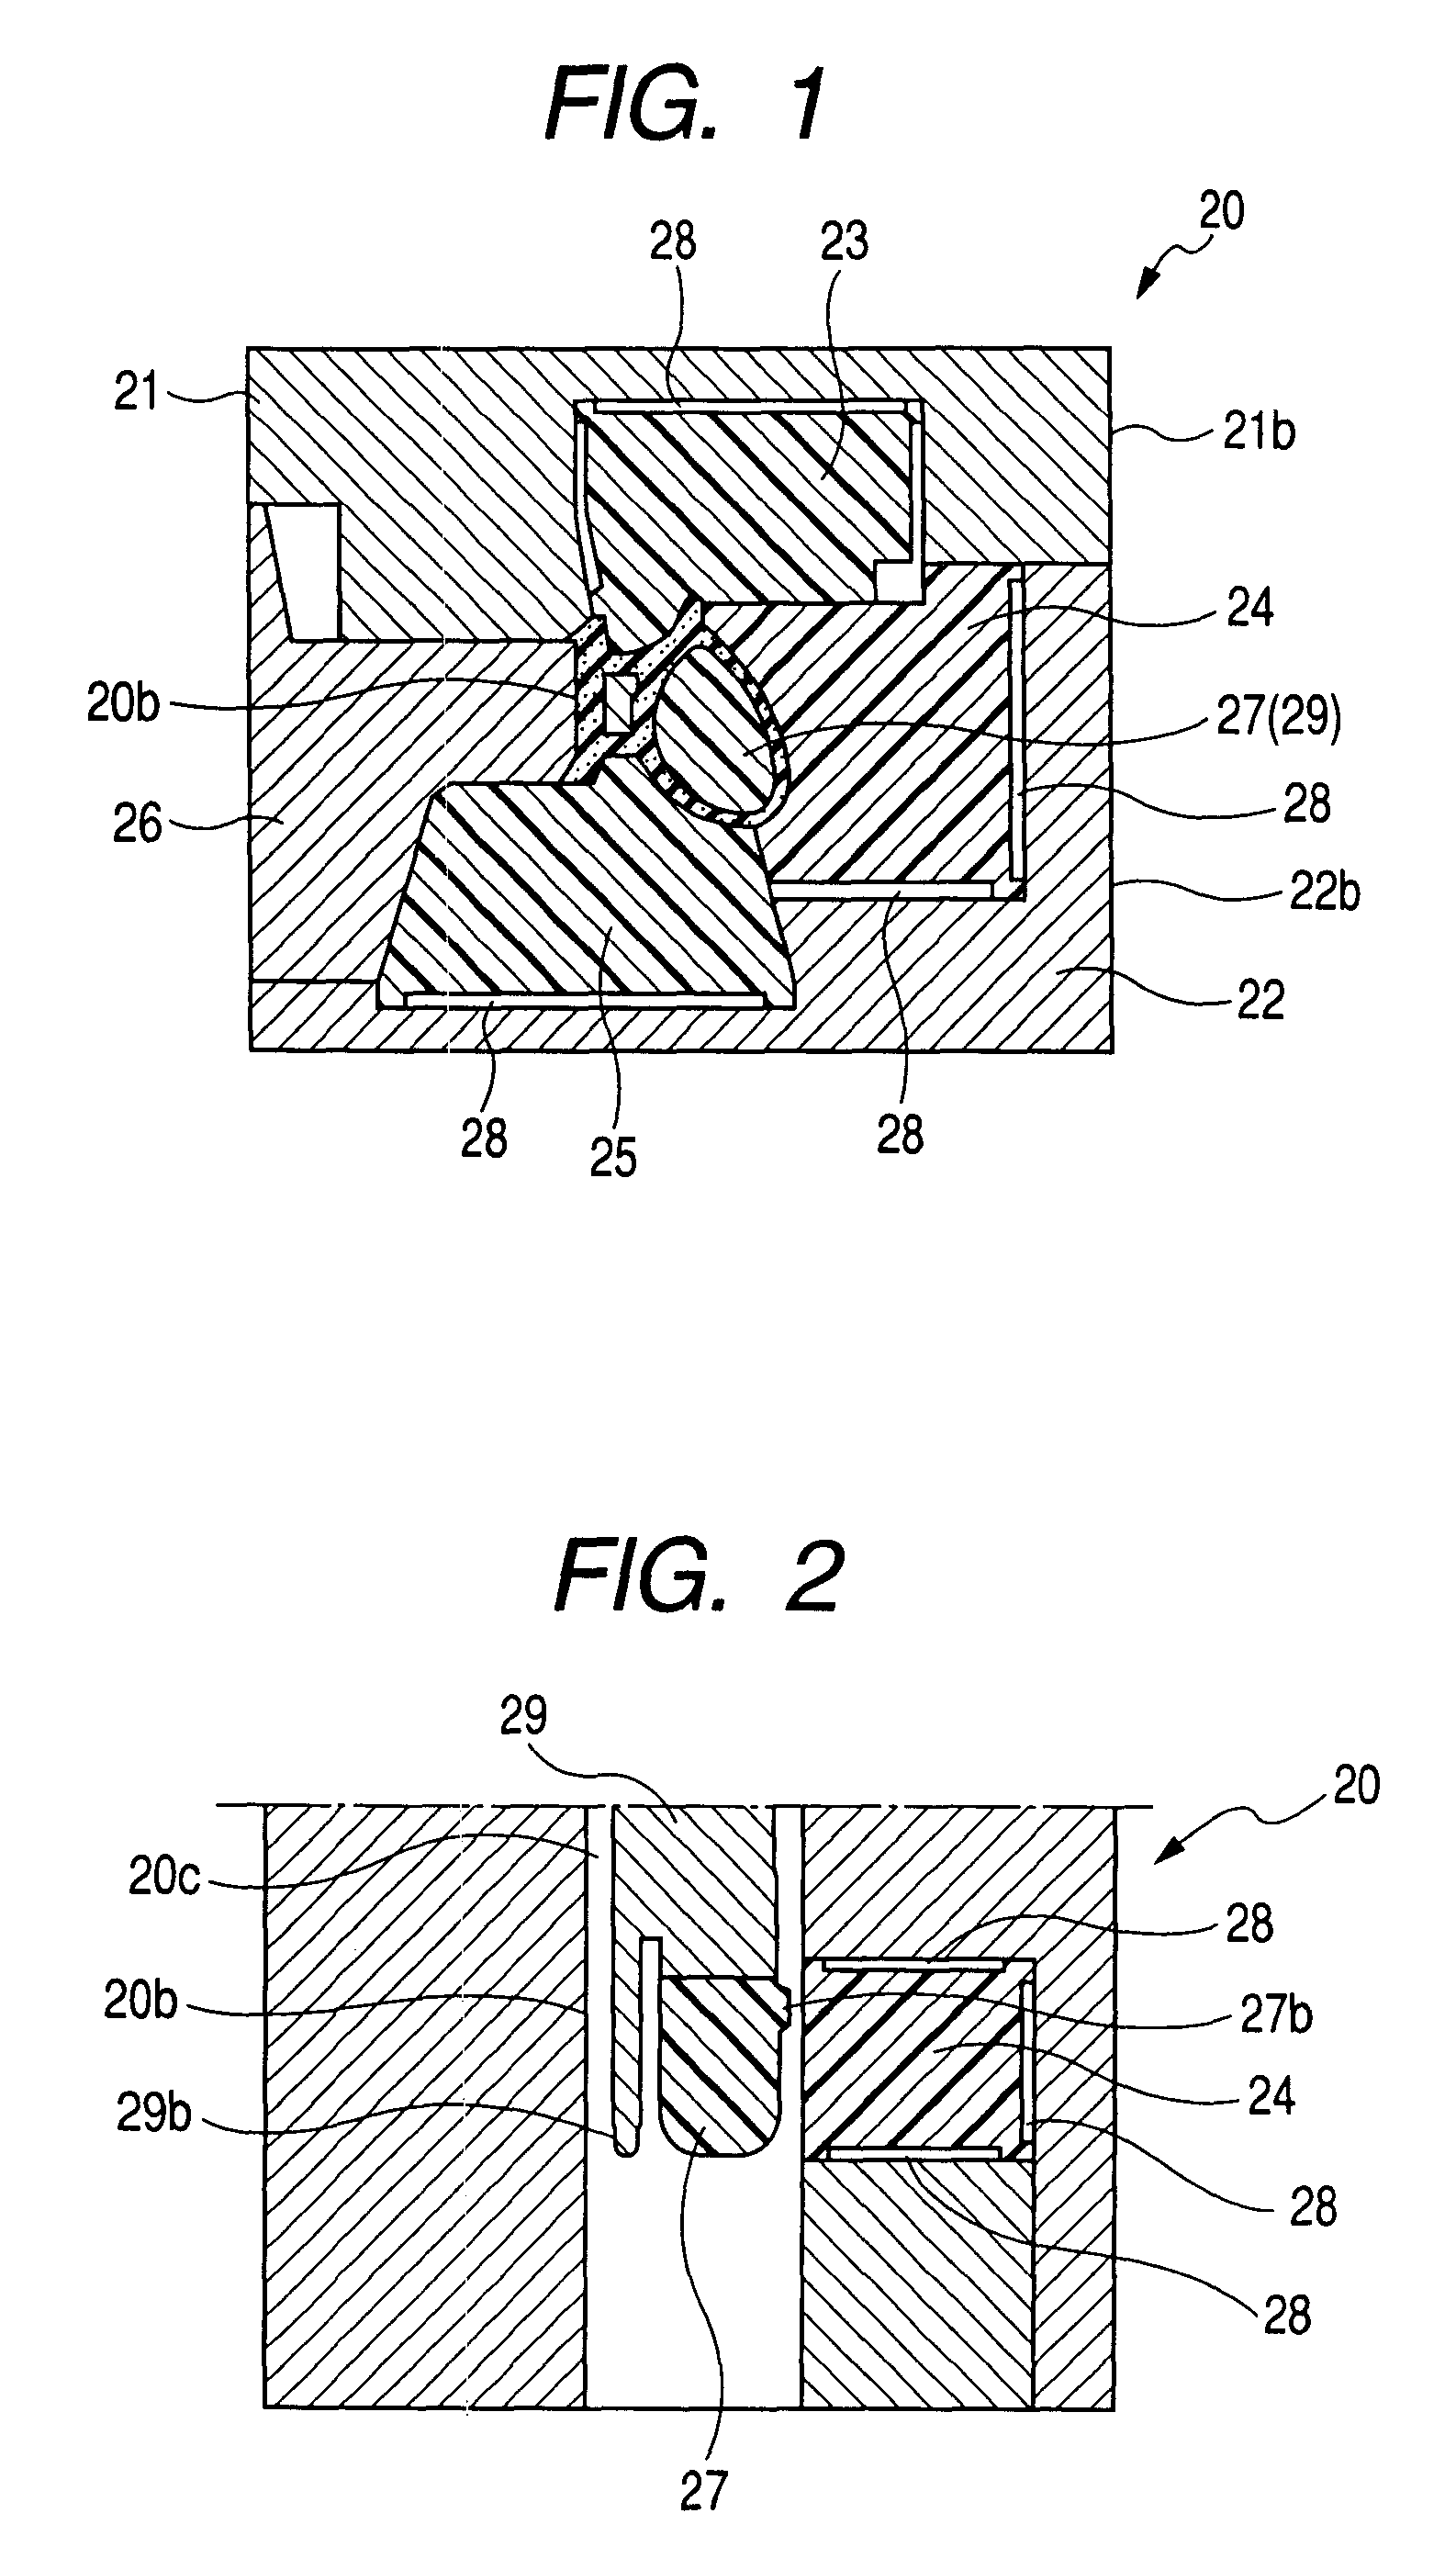 Molding device for molding a weather strip